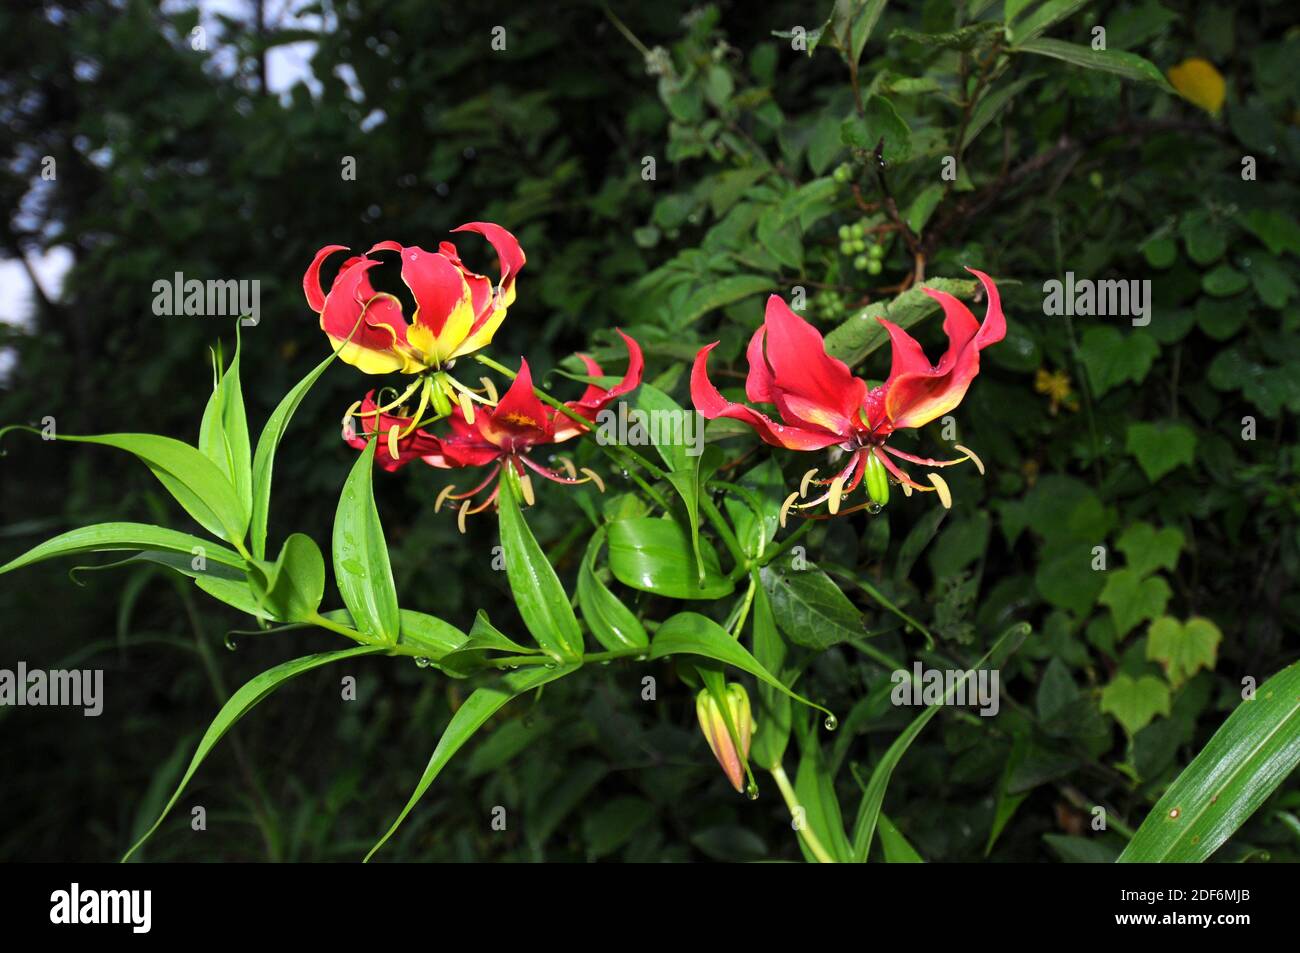 Flame lily or glory lily (Gloriosa superba) is a perennial herb native to South Africa. Stock Photo